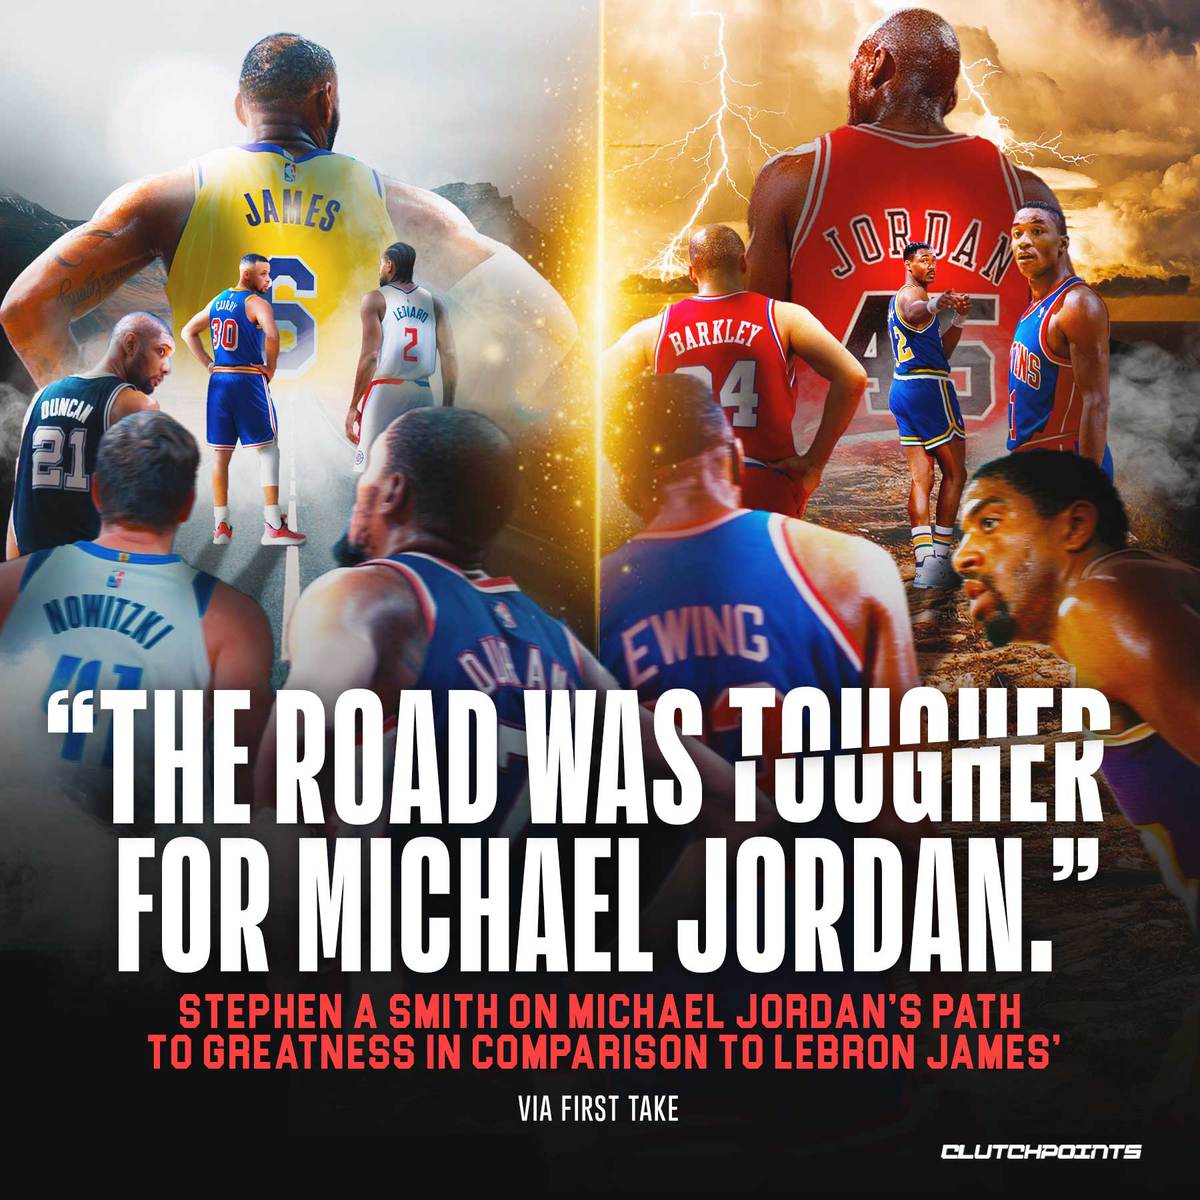 ClutchPoints on X: "According to Stephen A Smith, Michael Jordan's path to  greatness was tougher than that of LeBron James for these reasons: -Tougher  Opponents -Different rules -More physical game https://t.co/y0BDxFC66m" /